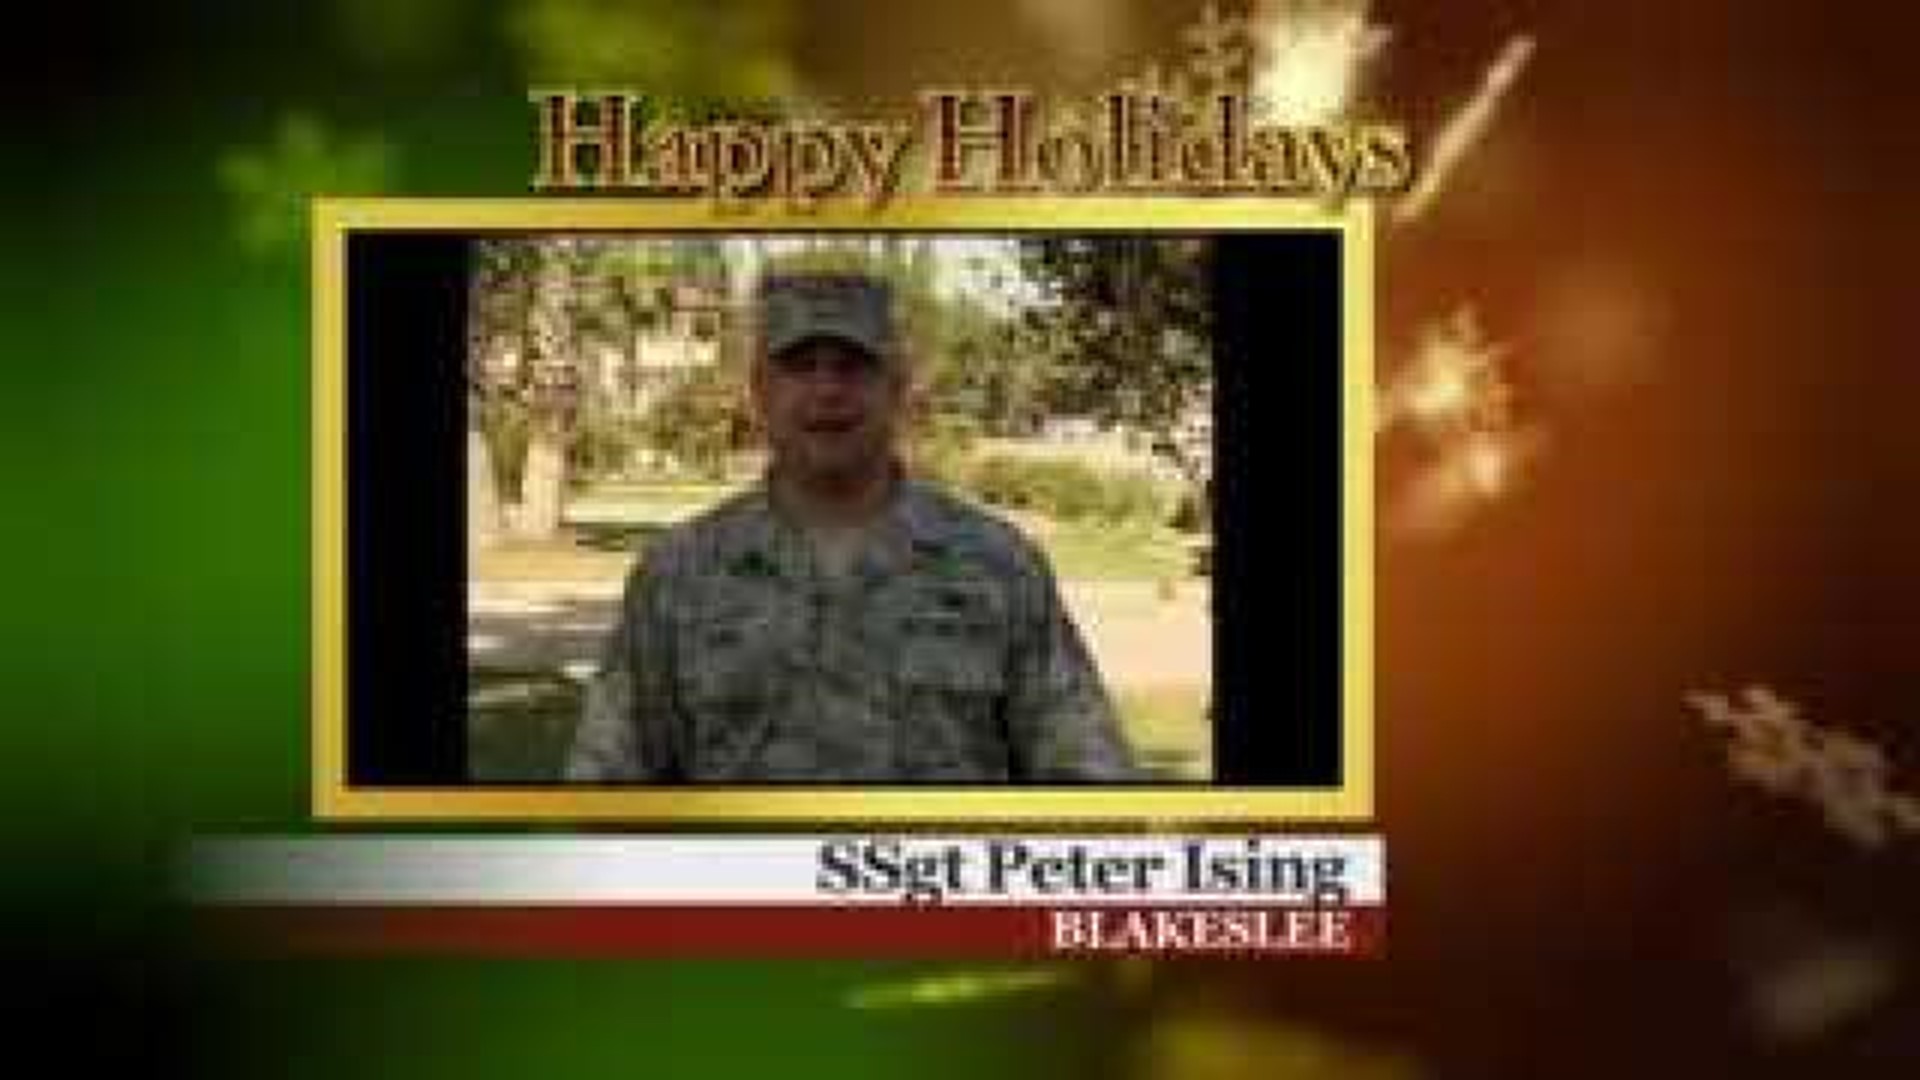 Military Greeting: SSgt Peter Ising